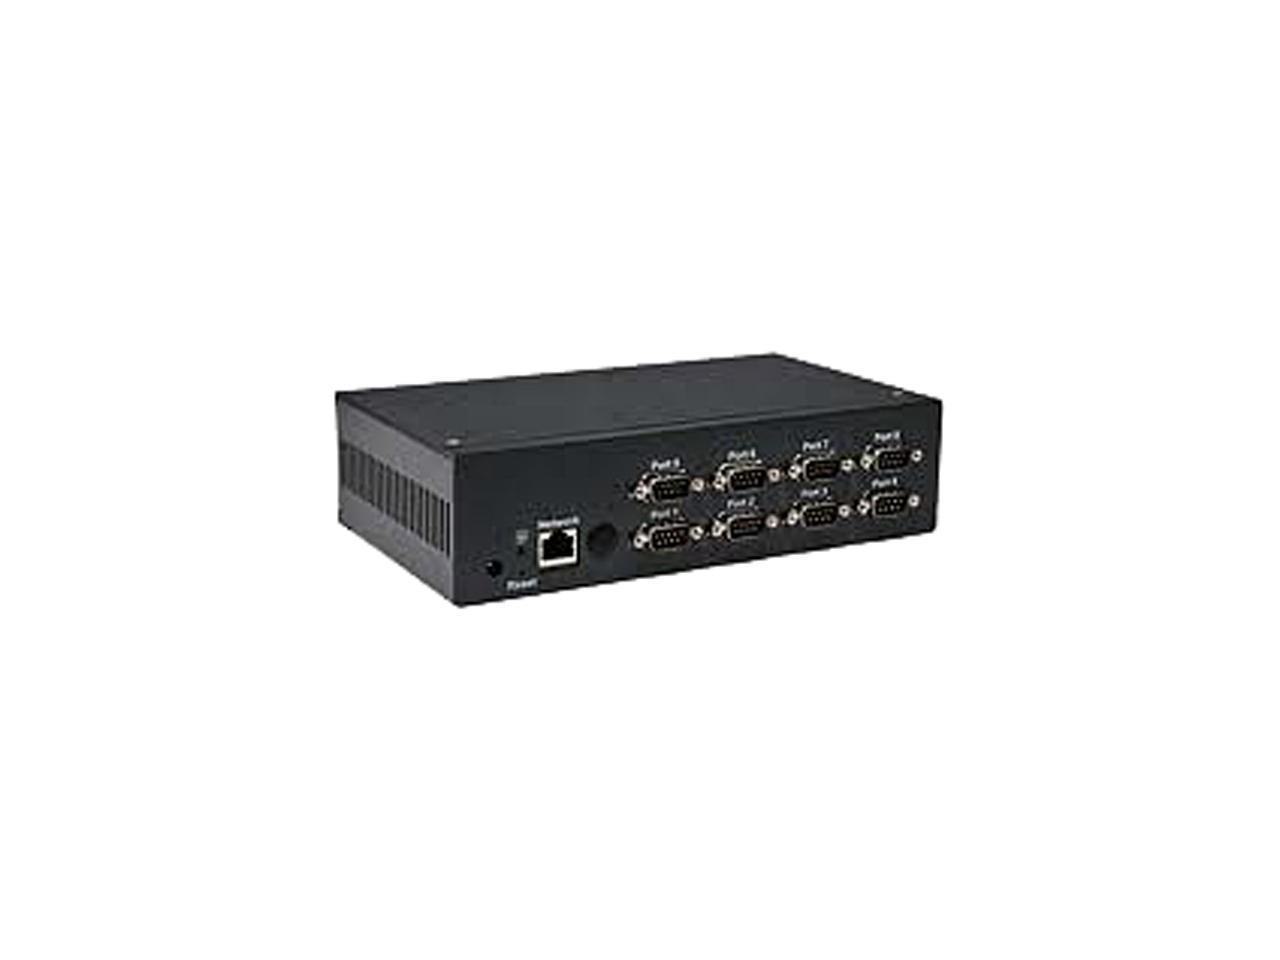 Brainboxes Es-279 8 Port RS232 Ethernet To Serial Adapter